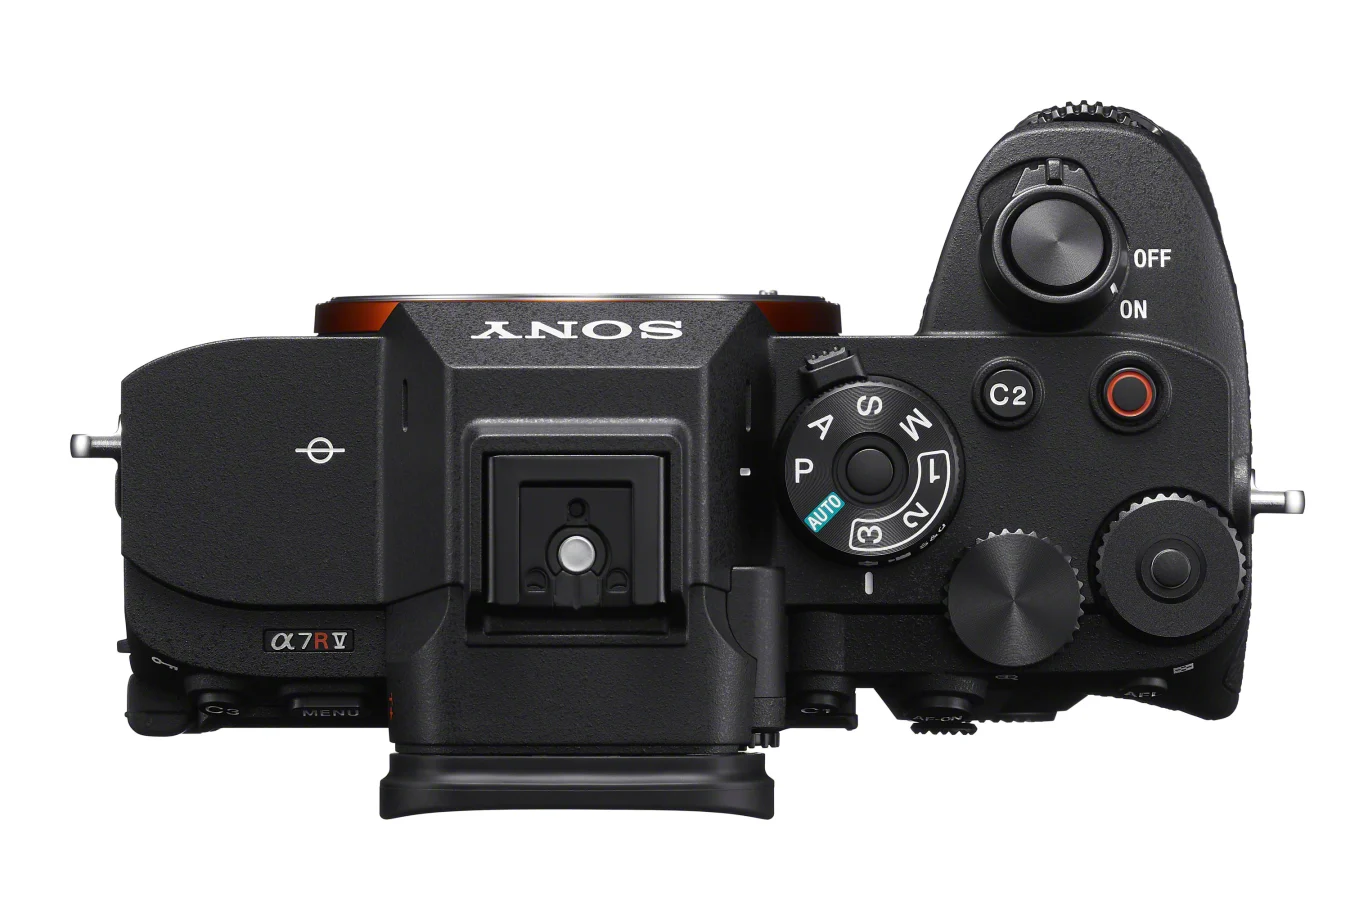 Sony's high-resolution A7R V mirrorless camera now shoots 8K video